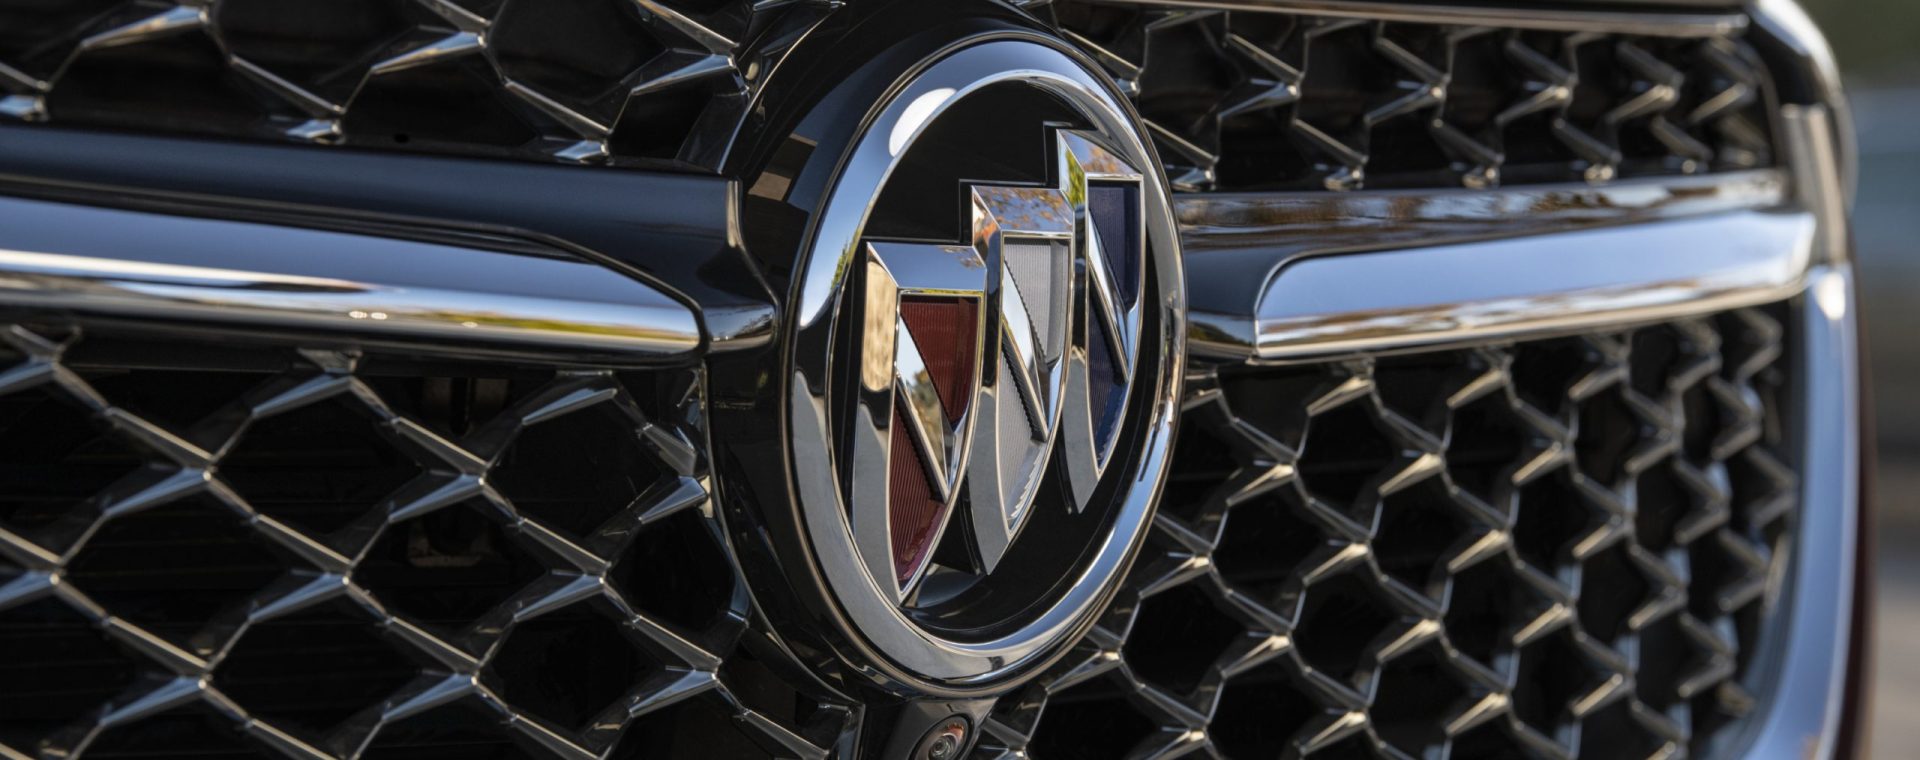 A close-up look at the luxurious Buick logo on the grille of a 2021 Buick Envision Avenir